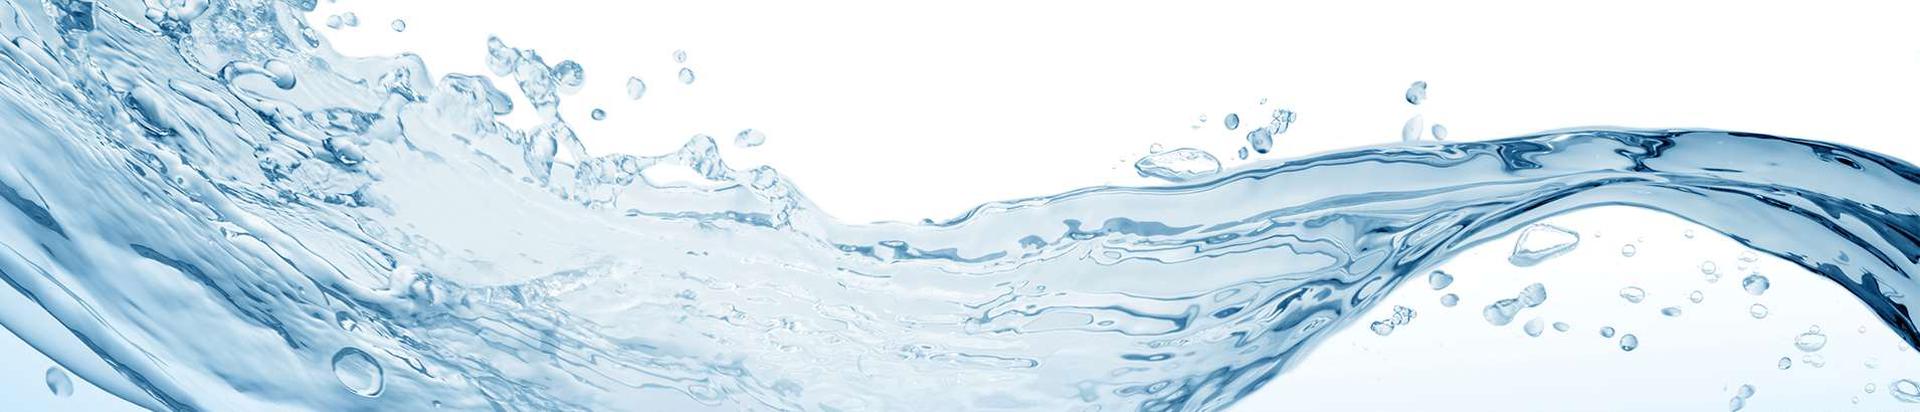 Water Systems and other related services, products, consultations